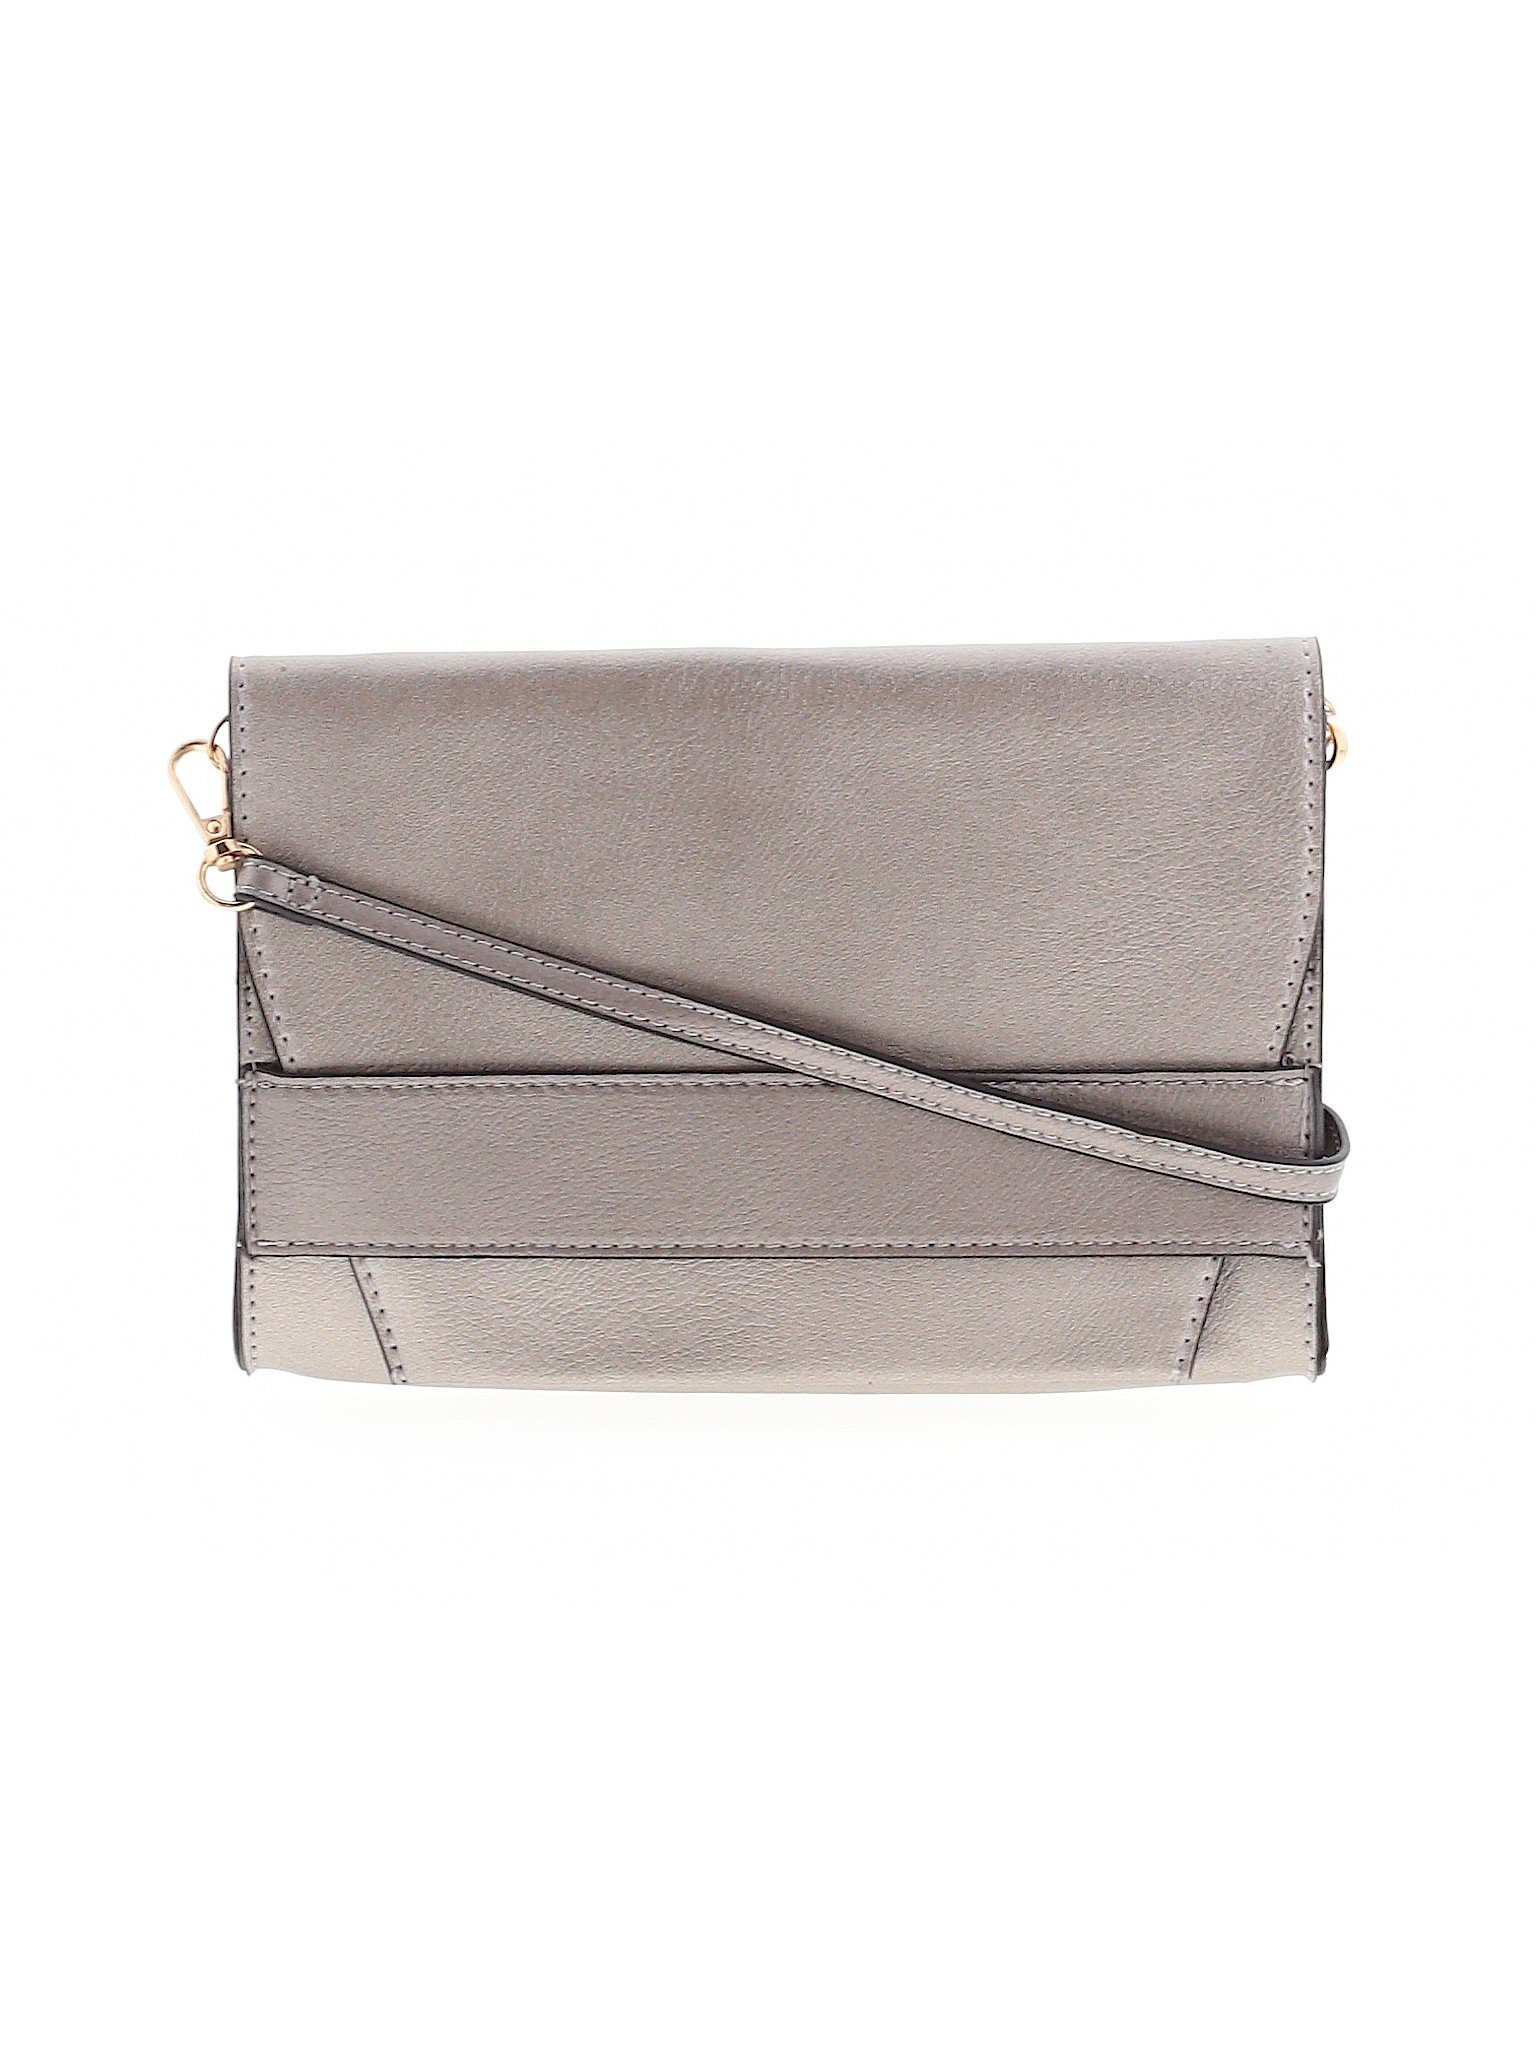 Summer & Rose Solid Metallic Gray Crossbody Bag One Size - 86% off ...